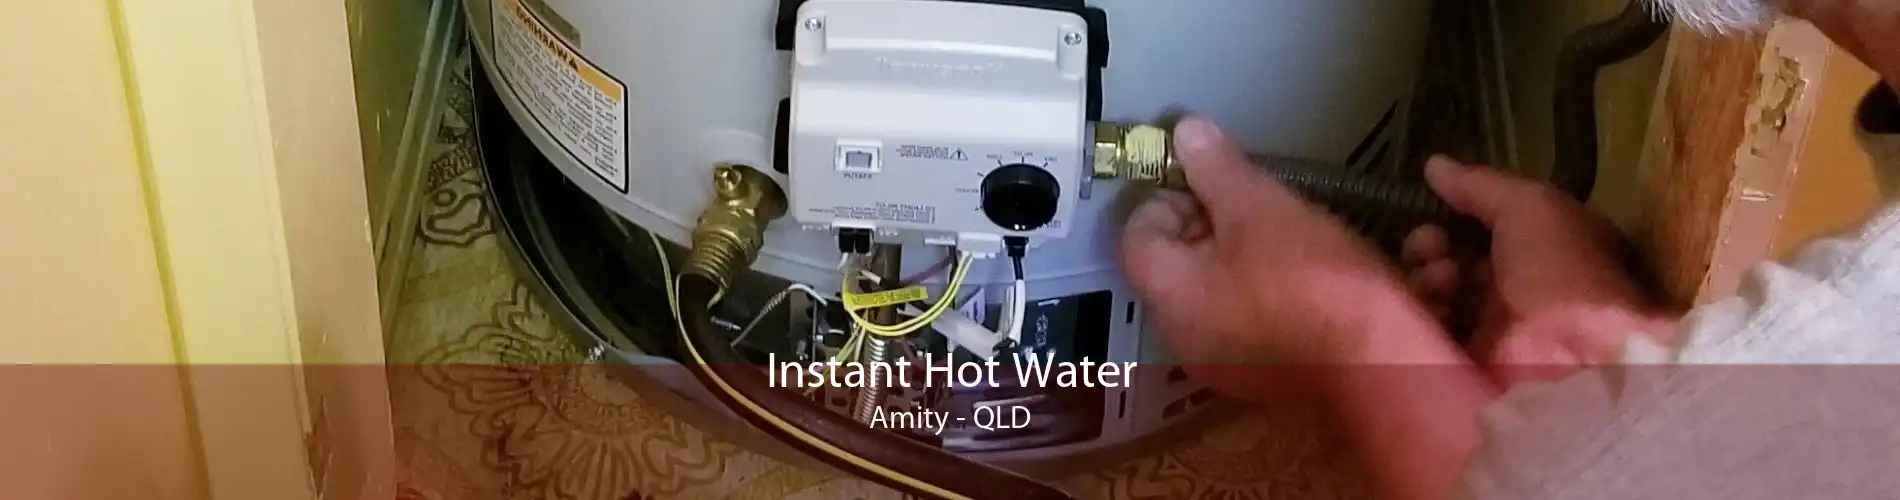 Instant Hot Water Amity - QLD